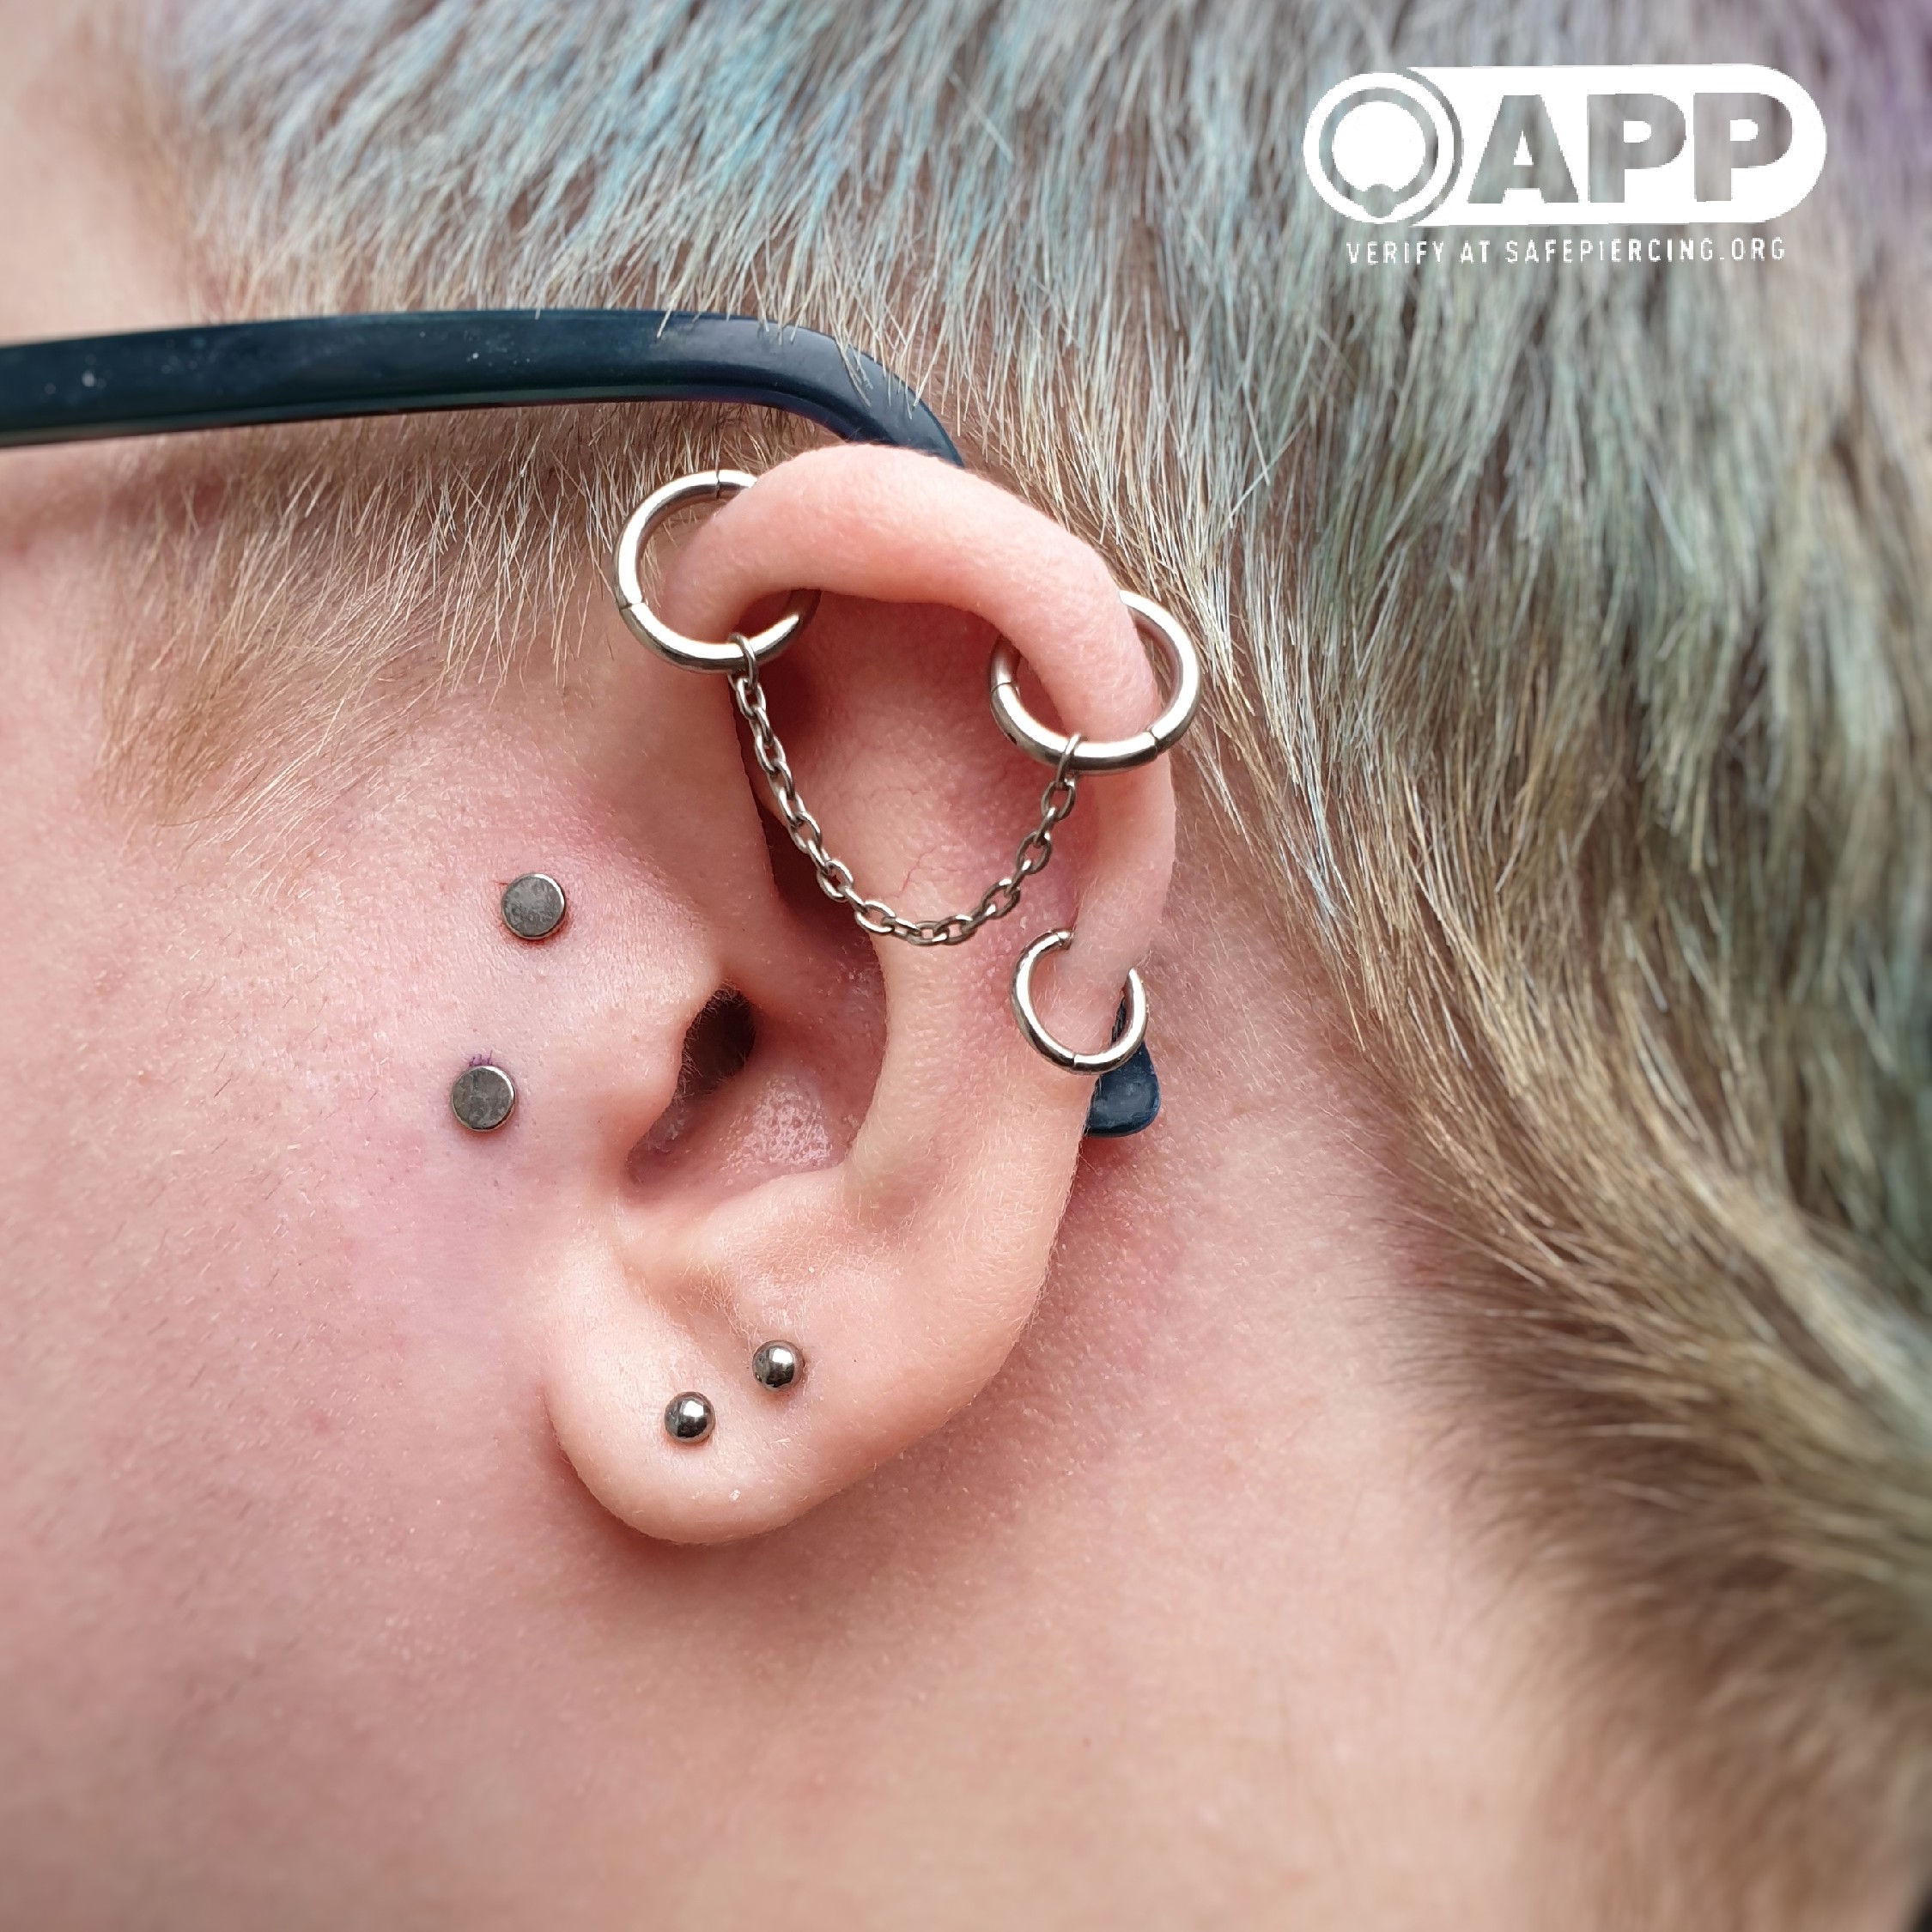 An interesting collection of left ear piercings. Two rings are where an industrial piercing would be they are joined across the ear with a chain. Then two disks in front of the tragus demonstrate a surface piercing. In the lobe is two plain balls